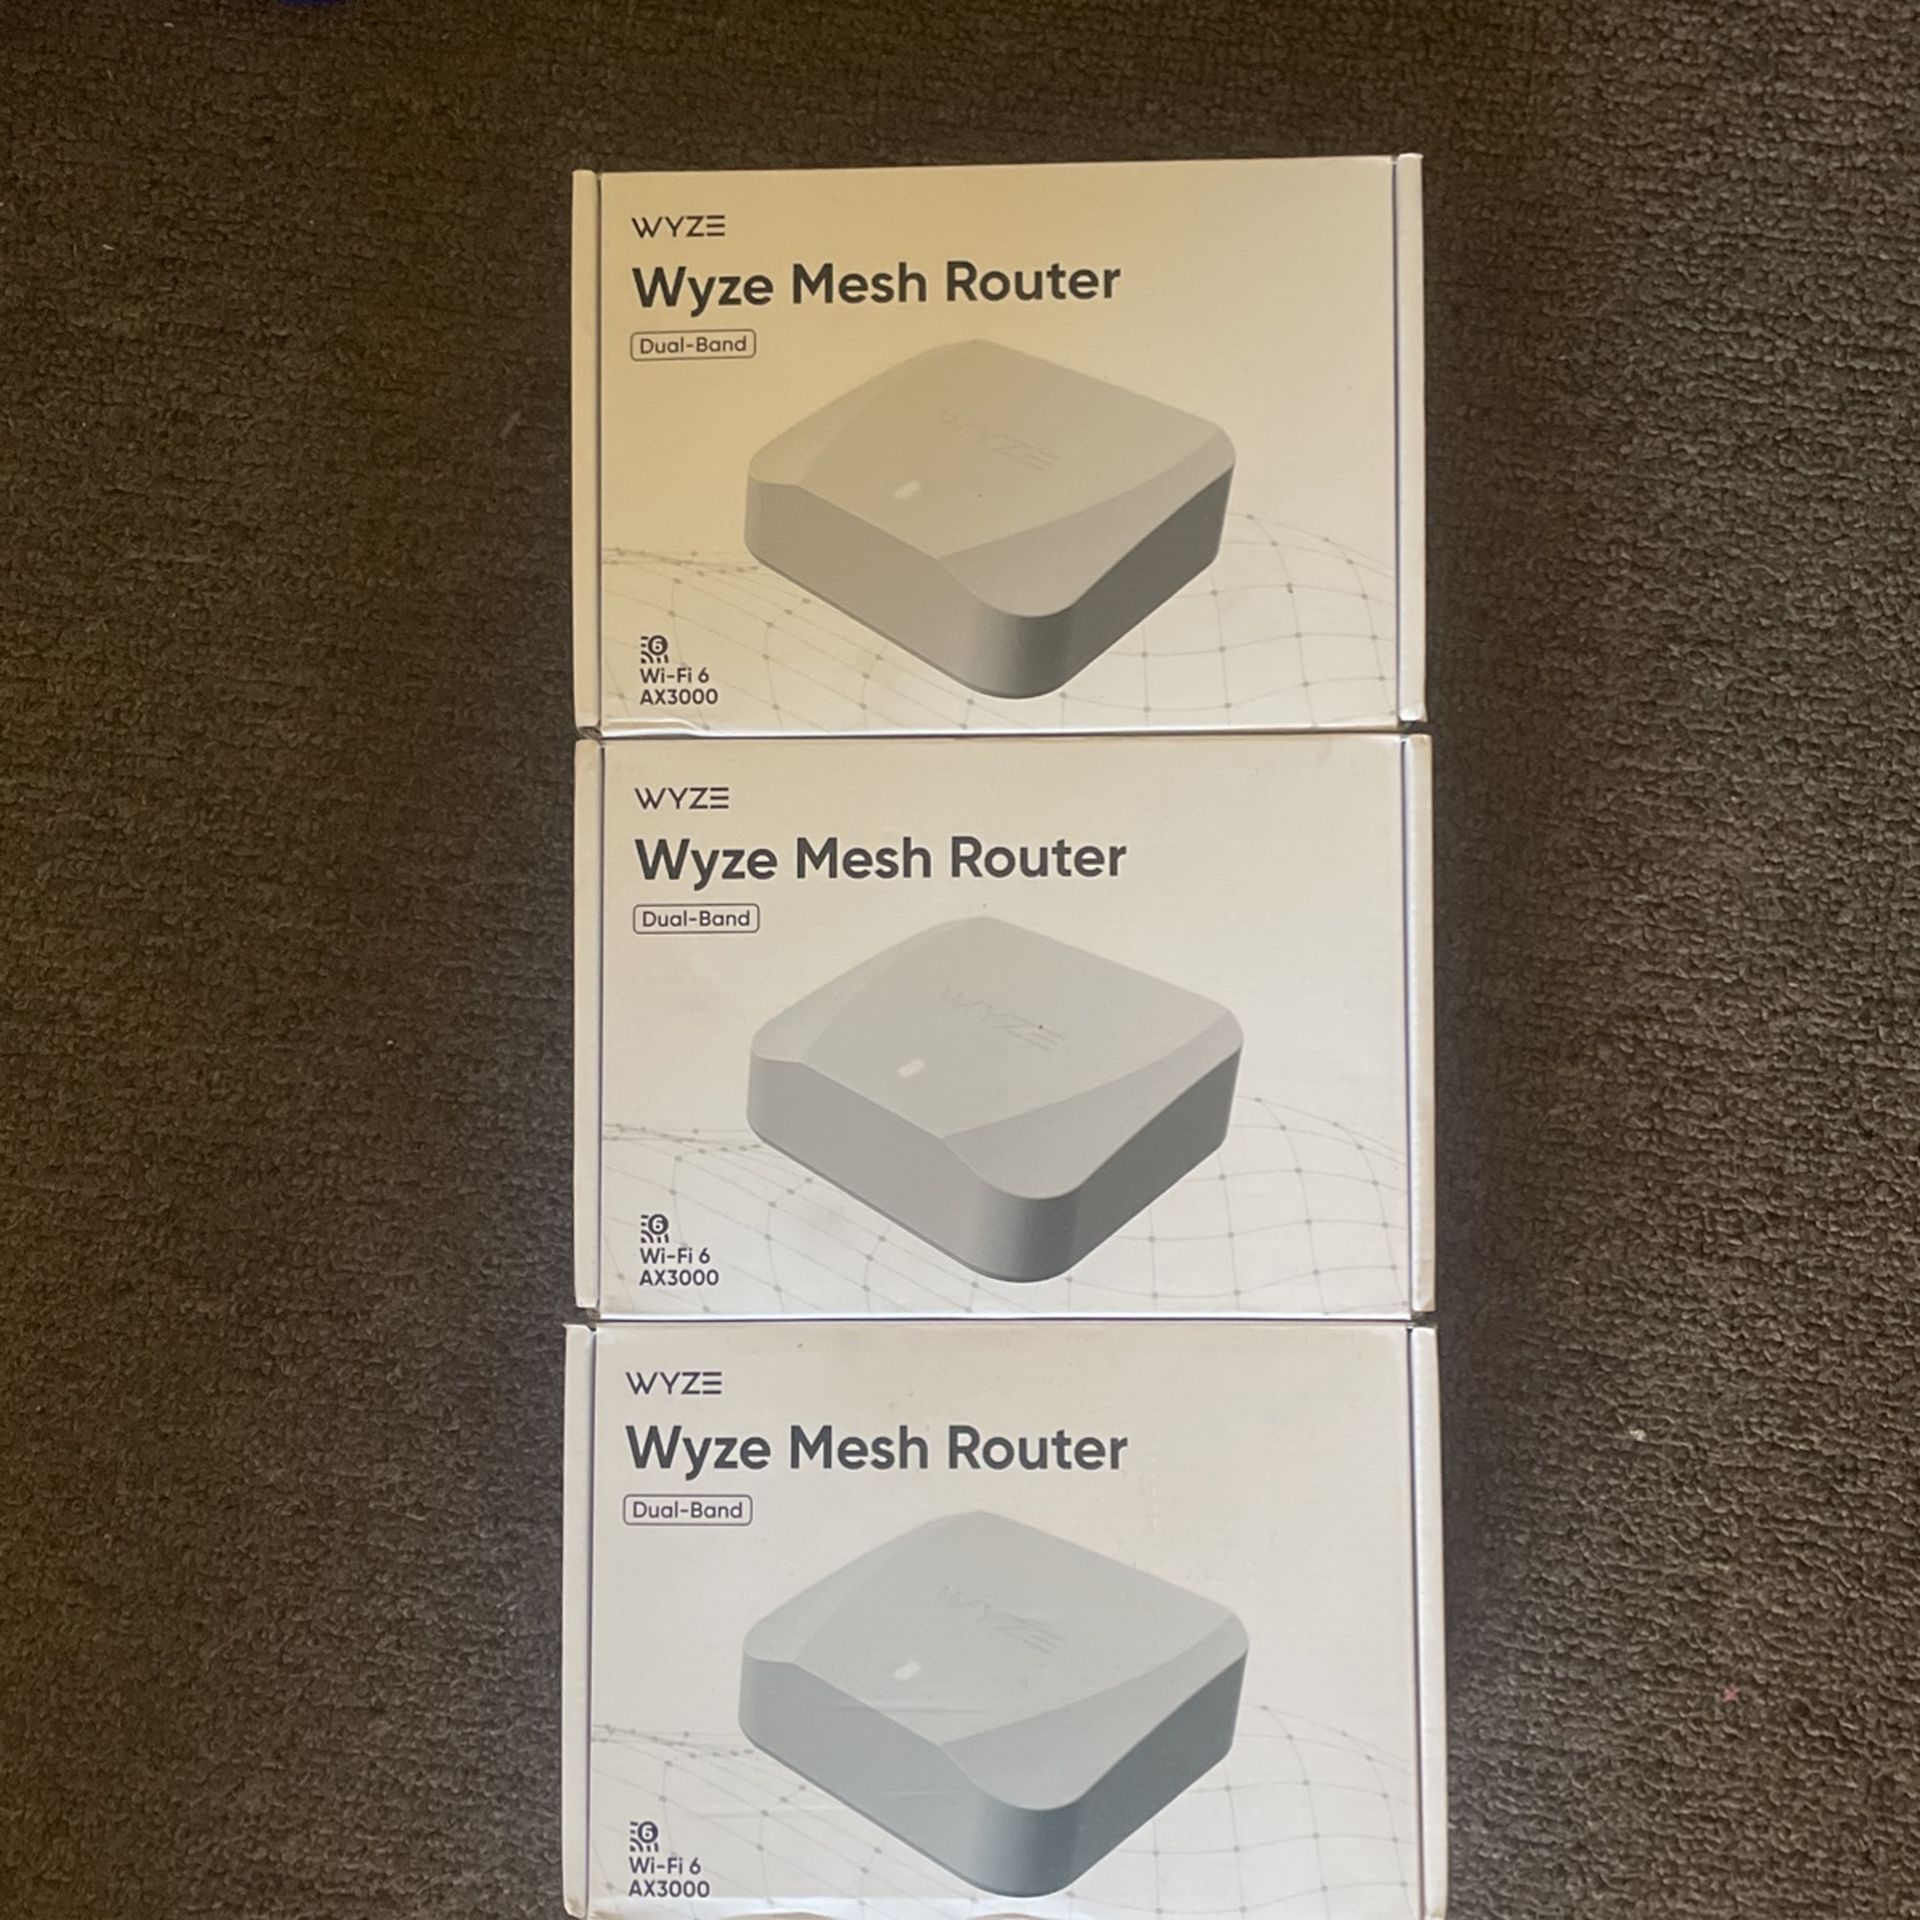 2 Wyze Mesh Routers 